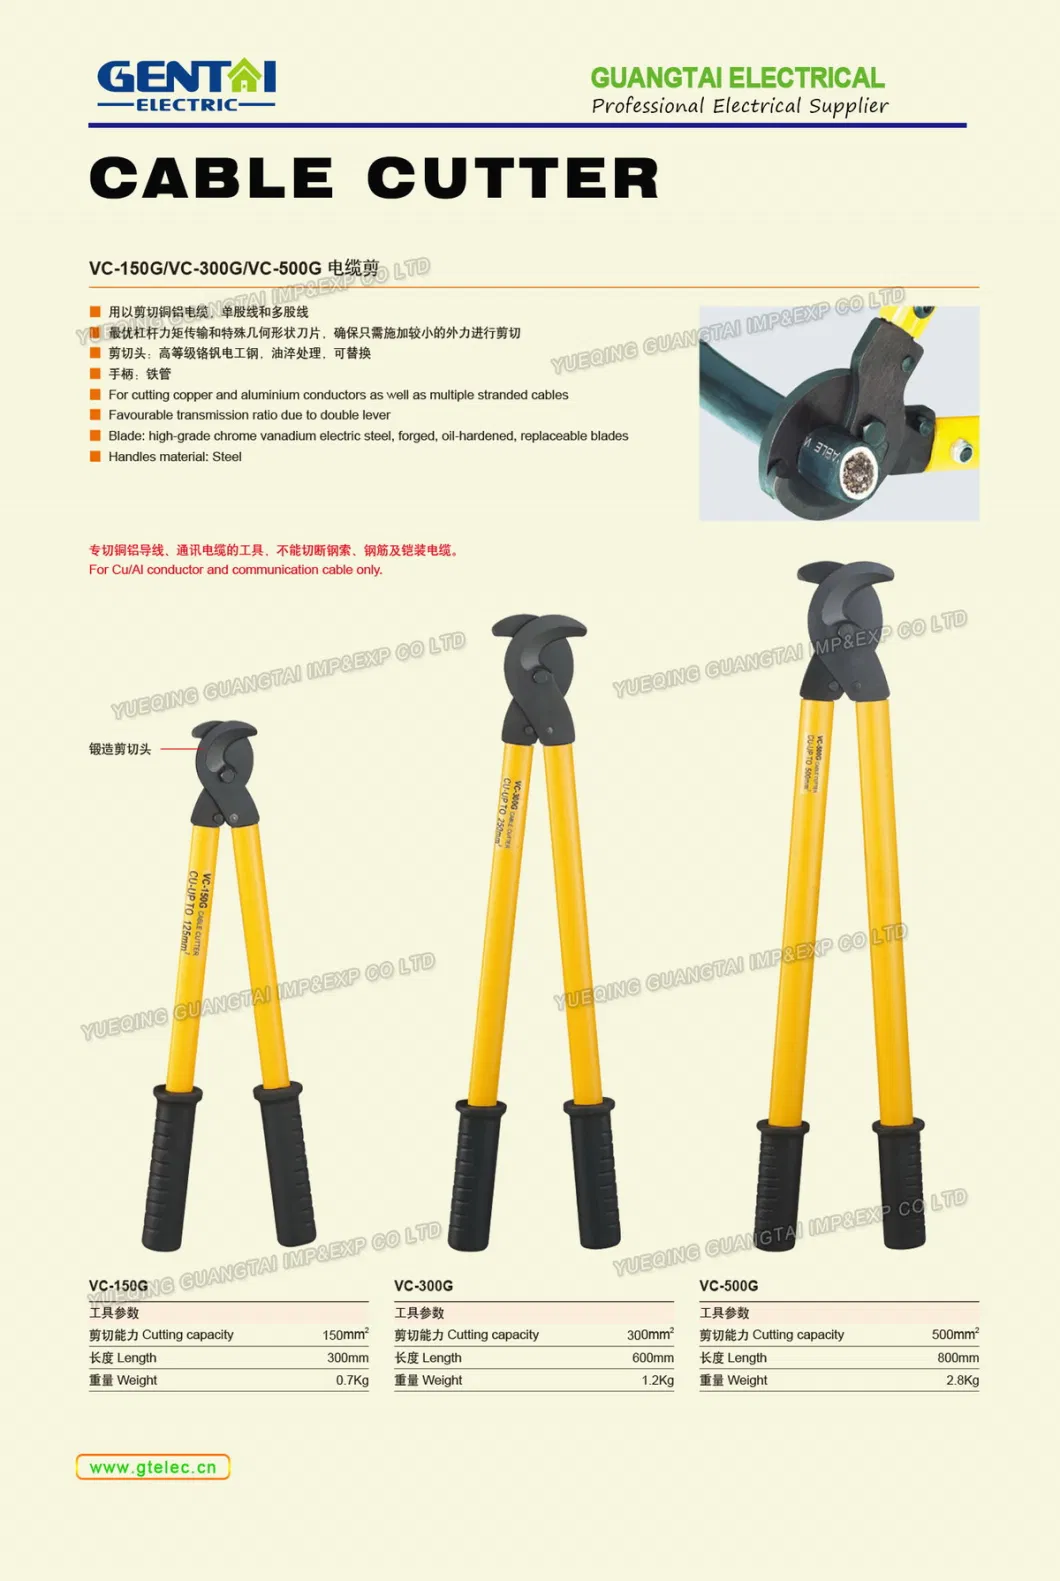 Applicable Ascr Armored Cable 400mm2 Hand Ratchet Armoured Cable Cutter